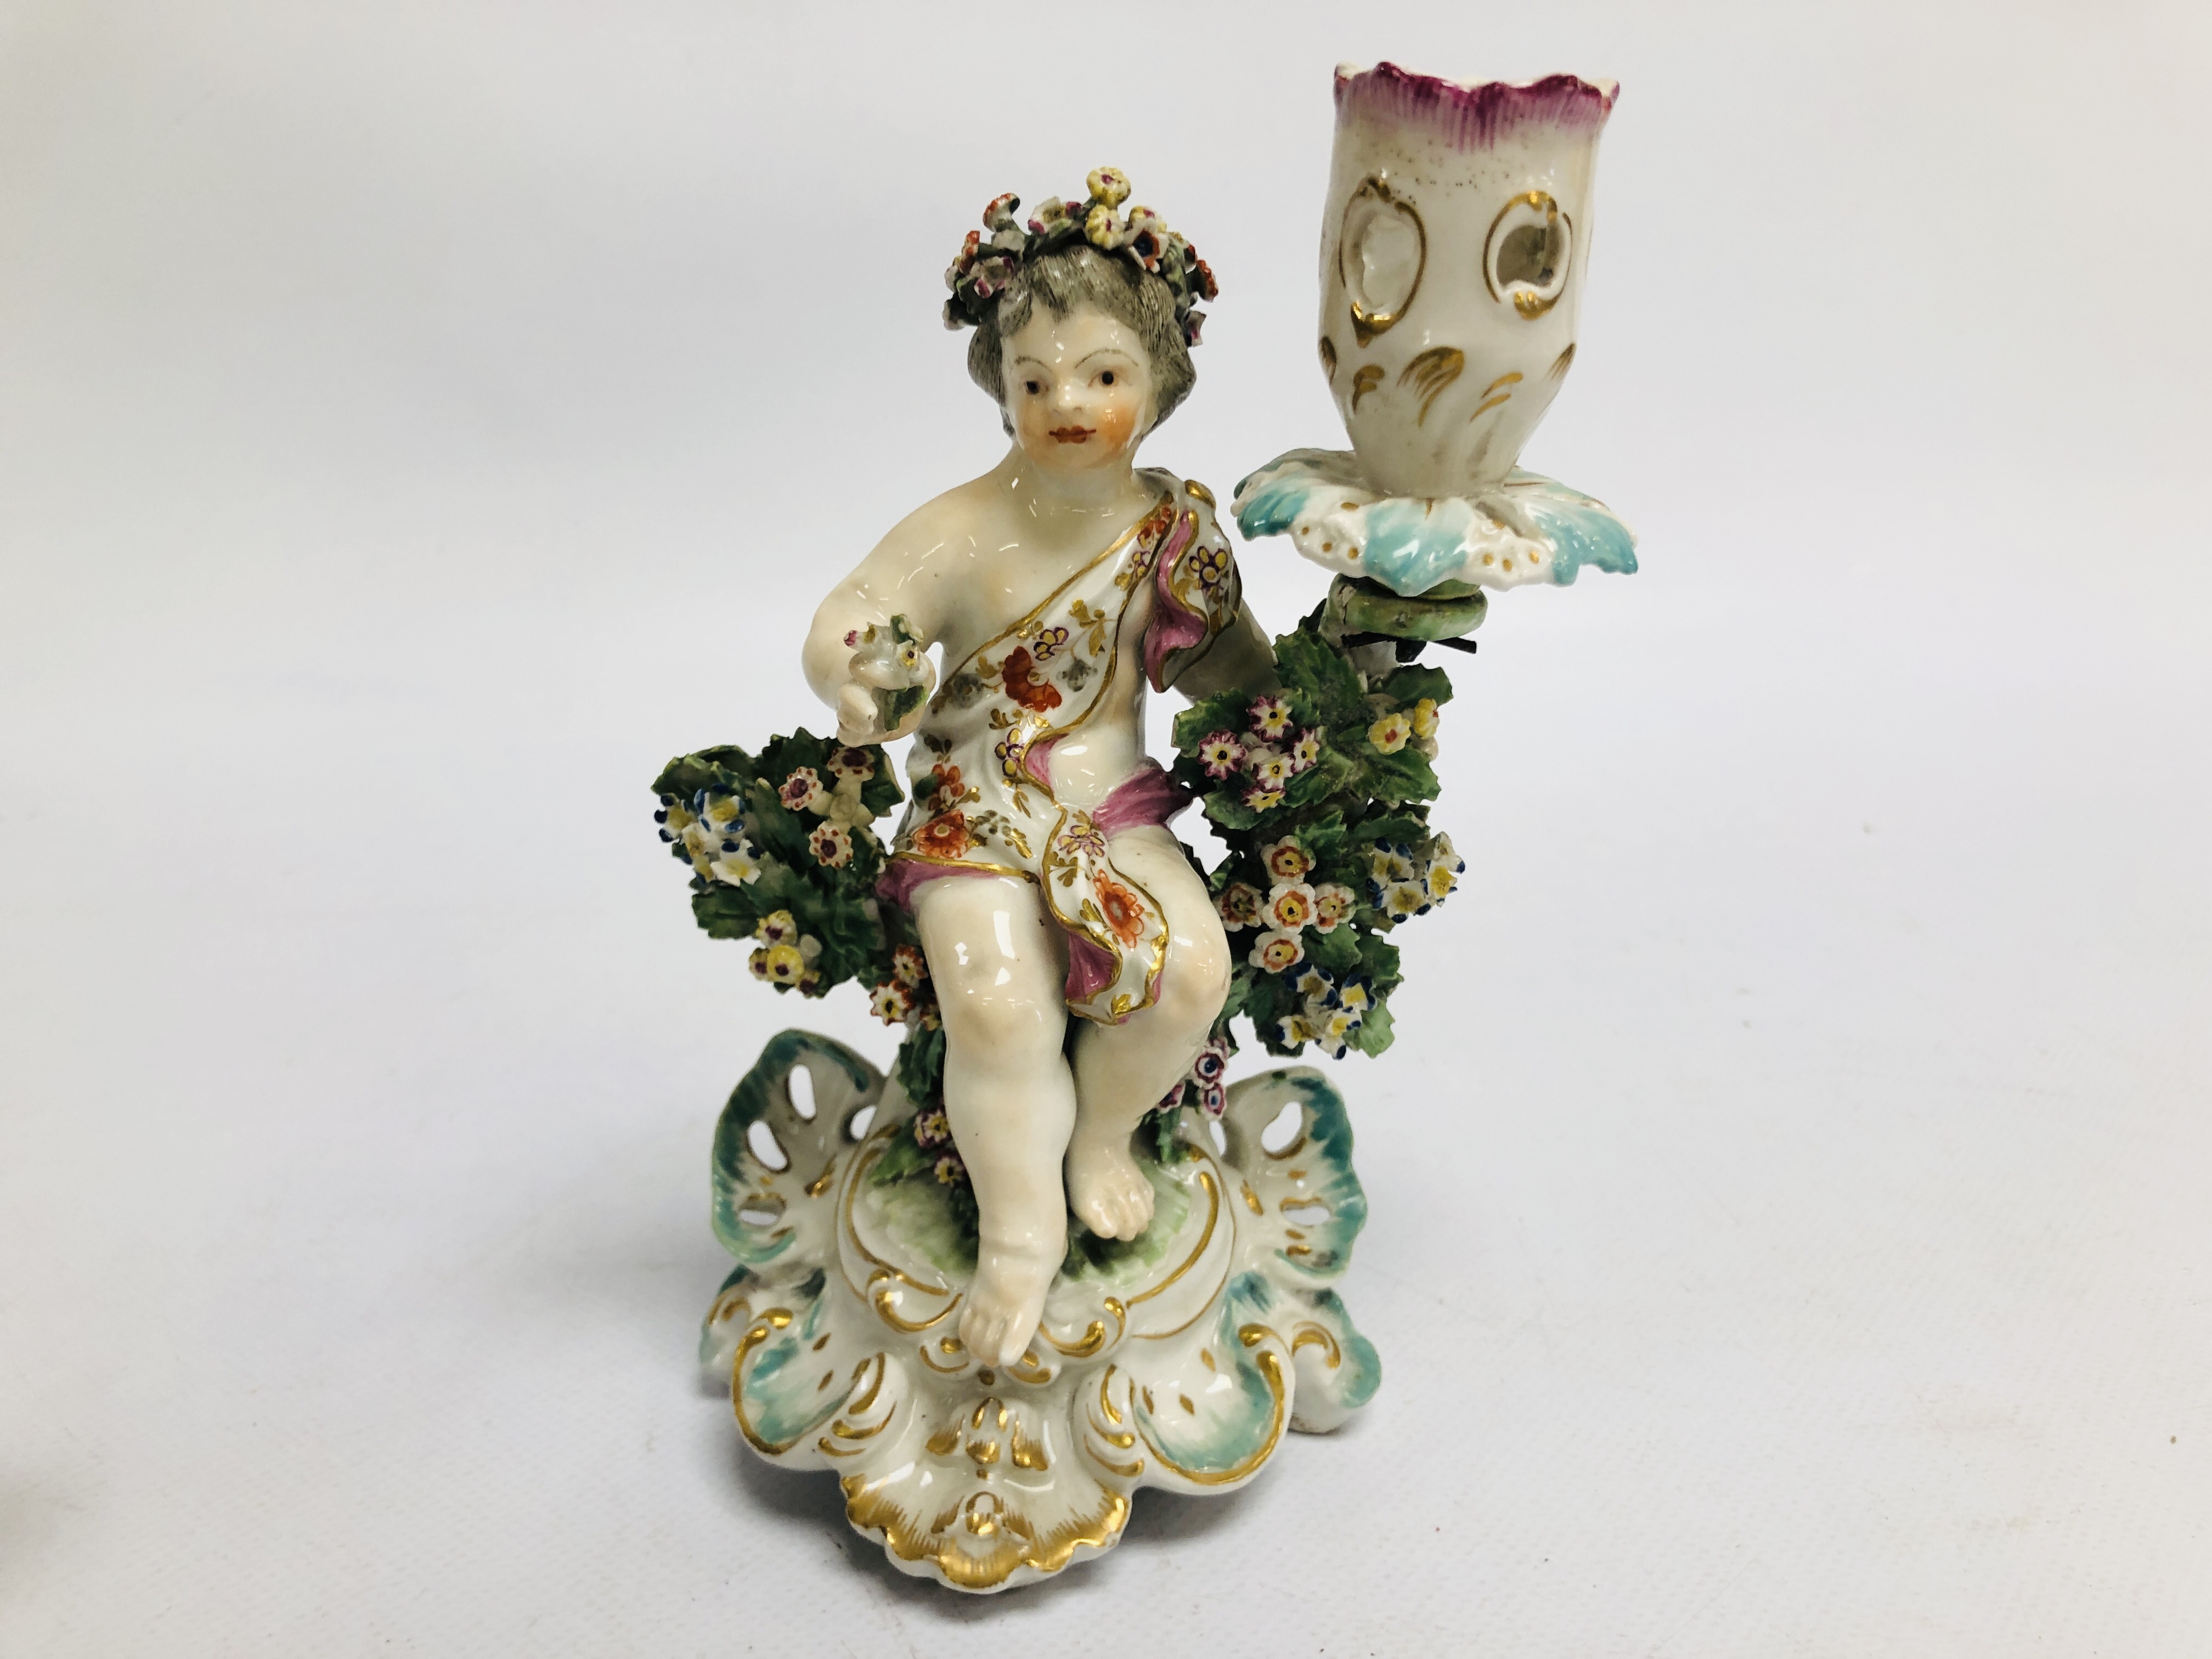 A PAIR OF DERBY FIGURAL CANDLESTICKS, THE SEATED BOY AND GIRL HOLDING A BASKET OF FLOWERS, H 17. - Image 13 of 24